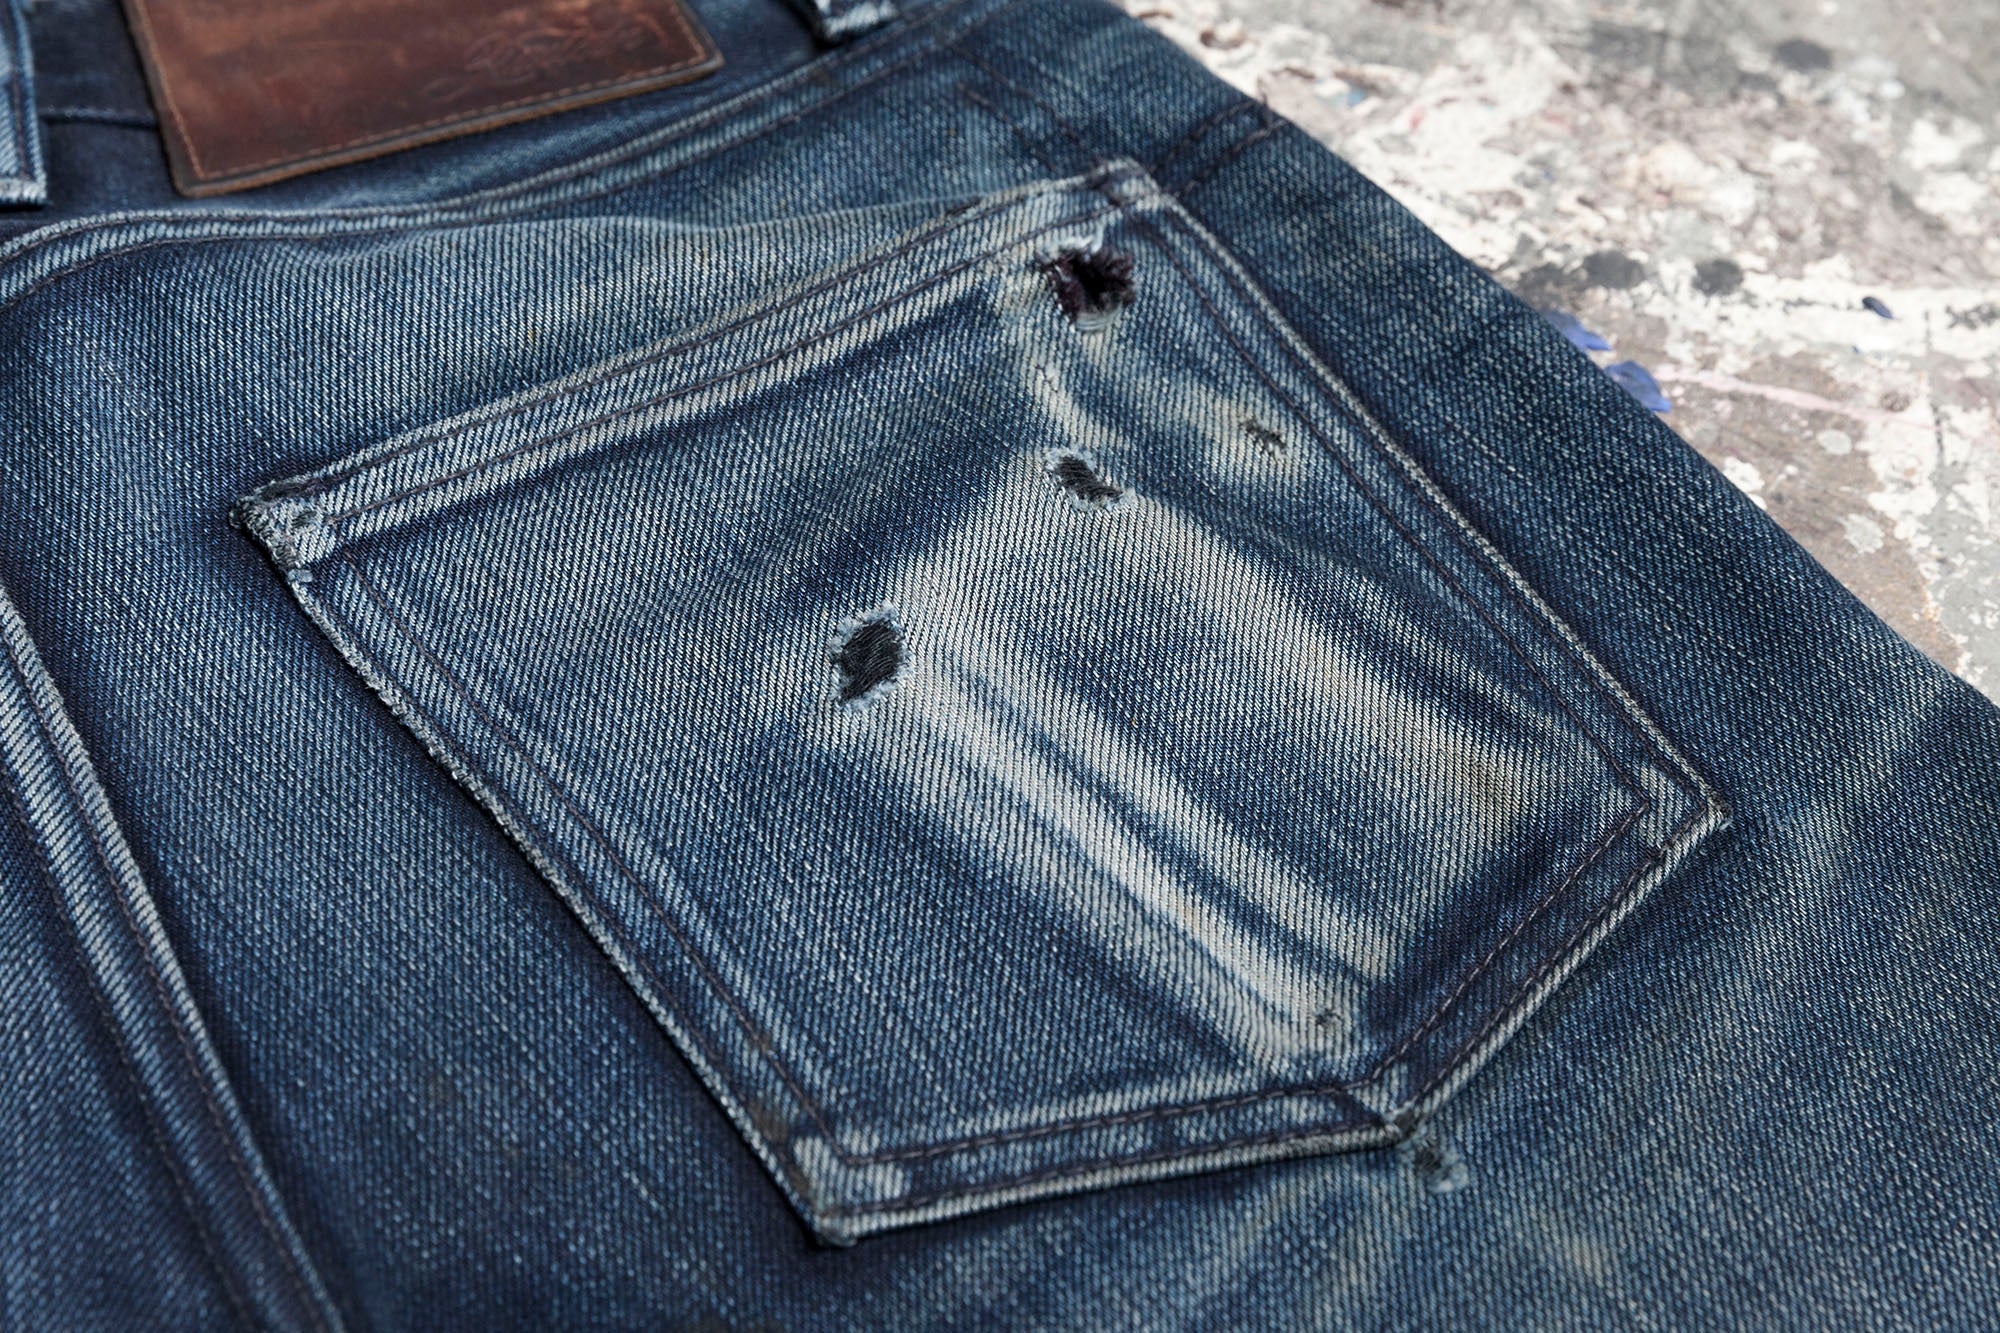 Closeup of the right rear pocket with fading and threadbare areas.